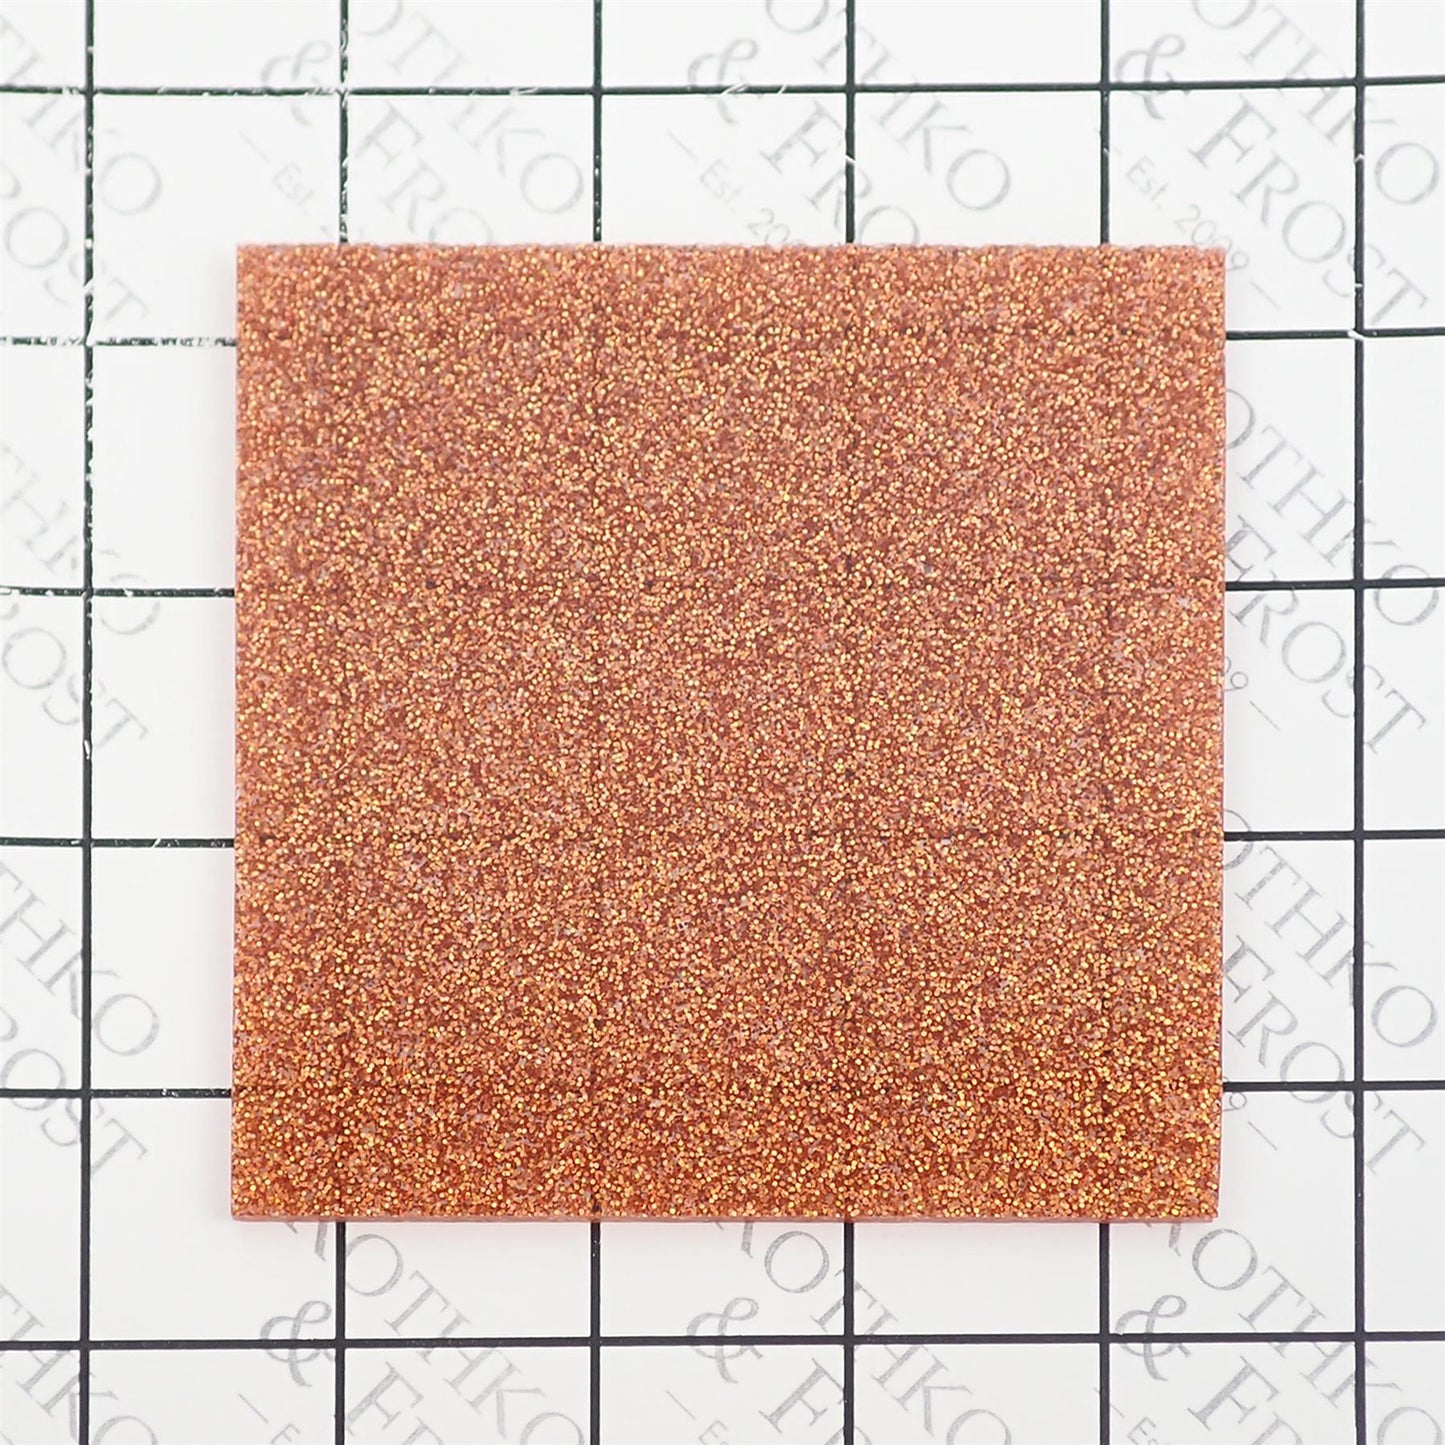 Incudo Copper 2-Sided Holographic Glitter Acrylic Sheet - 400x300x3mm (15.7x11.81x0.12")